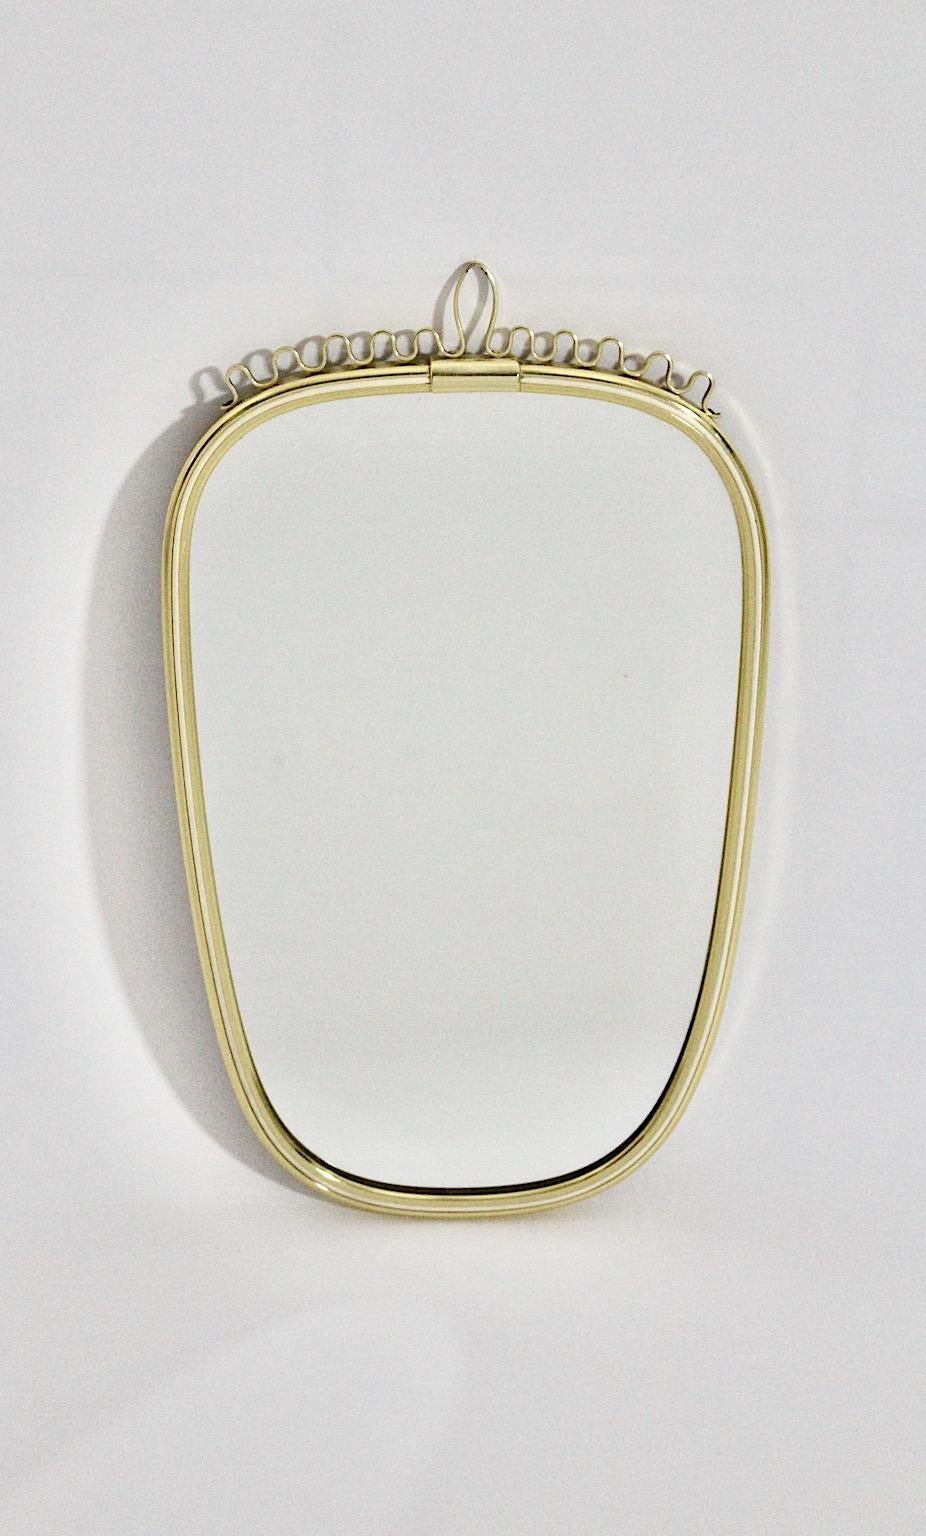 Mid-Century Modern vintage wall mirror oval like from solid brass with white inner edge and slightly curved details at the upper part 1960s Germany.
Very good condition with minor patina
labeled at the fibre board backside:
Metallrahmenspiegel